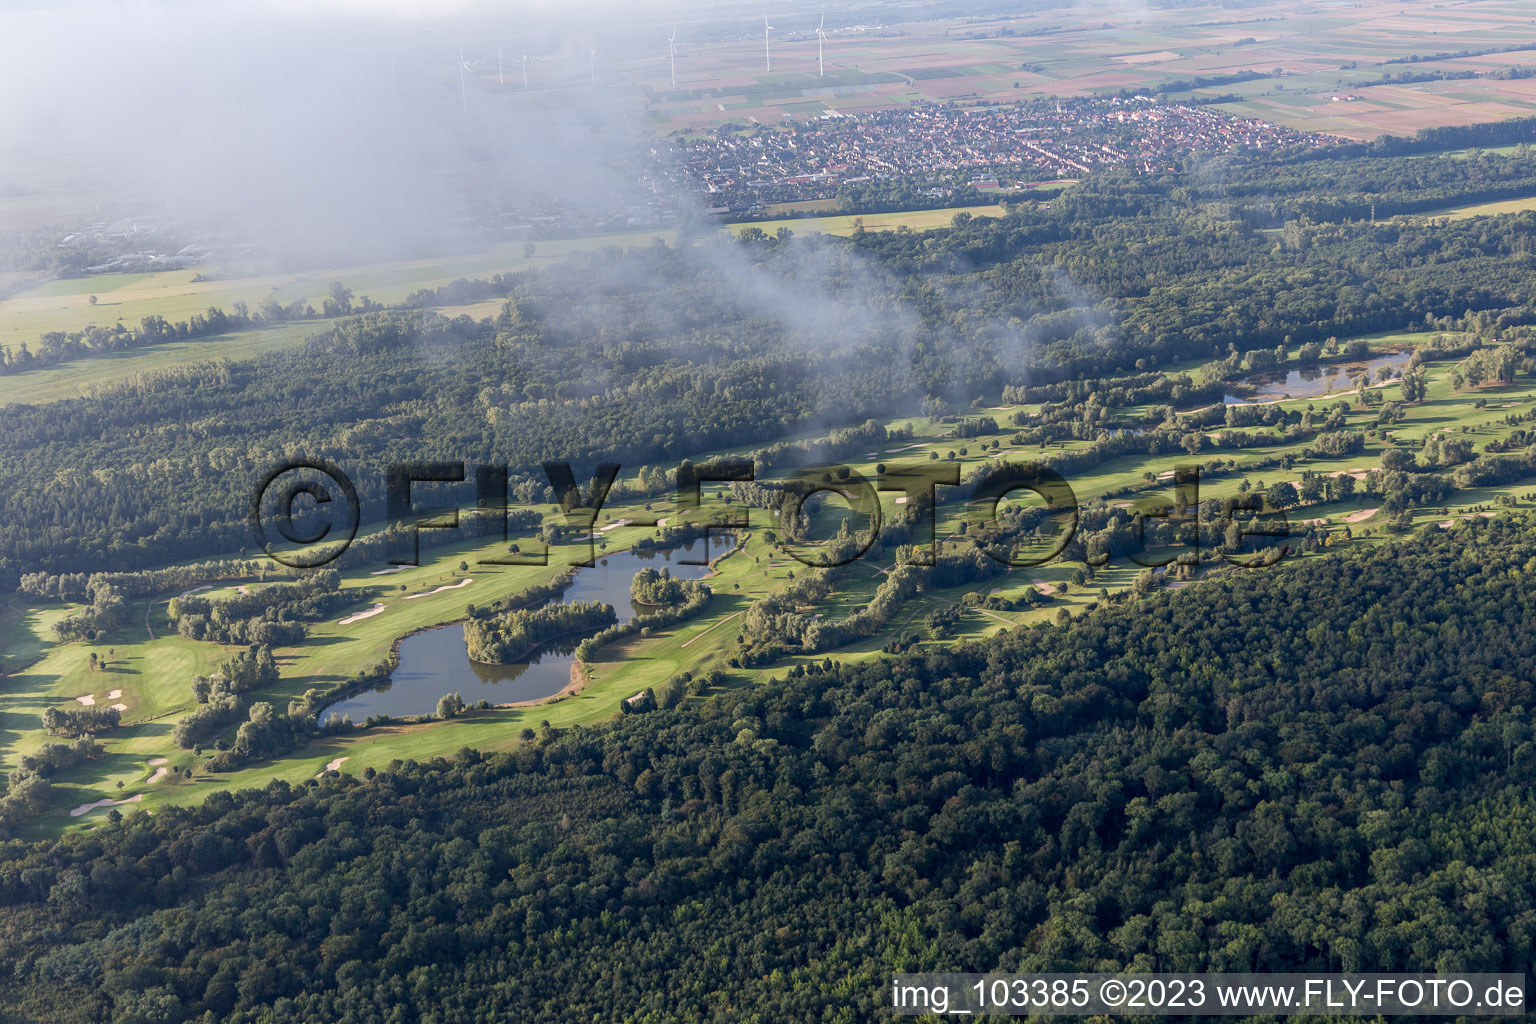 Golf course in Essingen in the state Rhineland-Palatinate, Germany from the plane